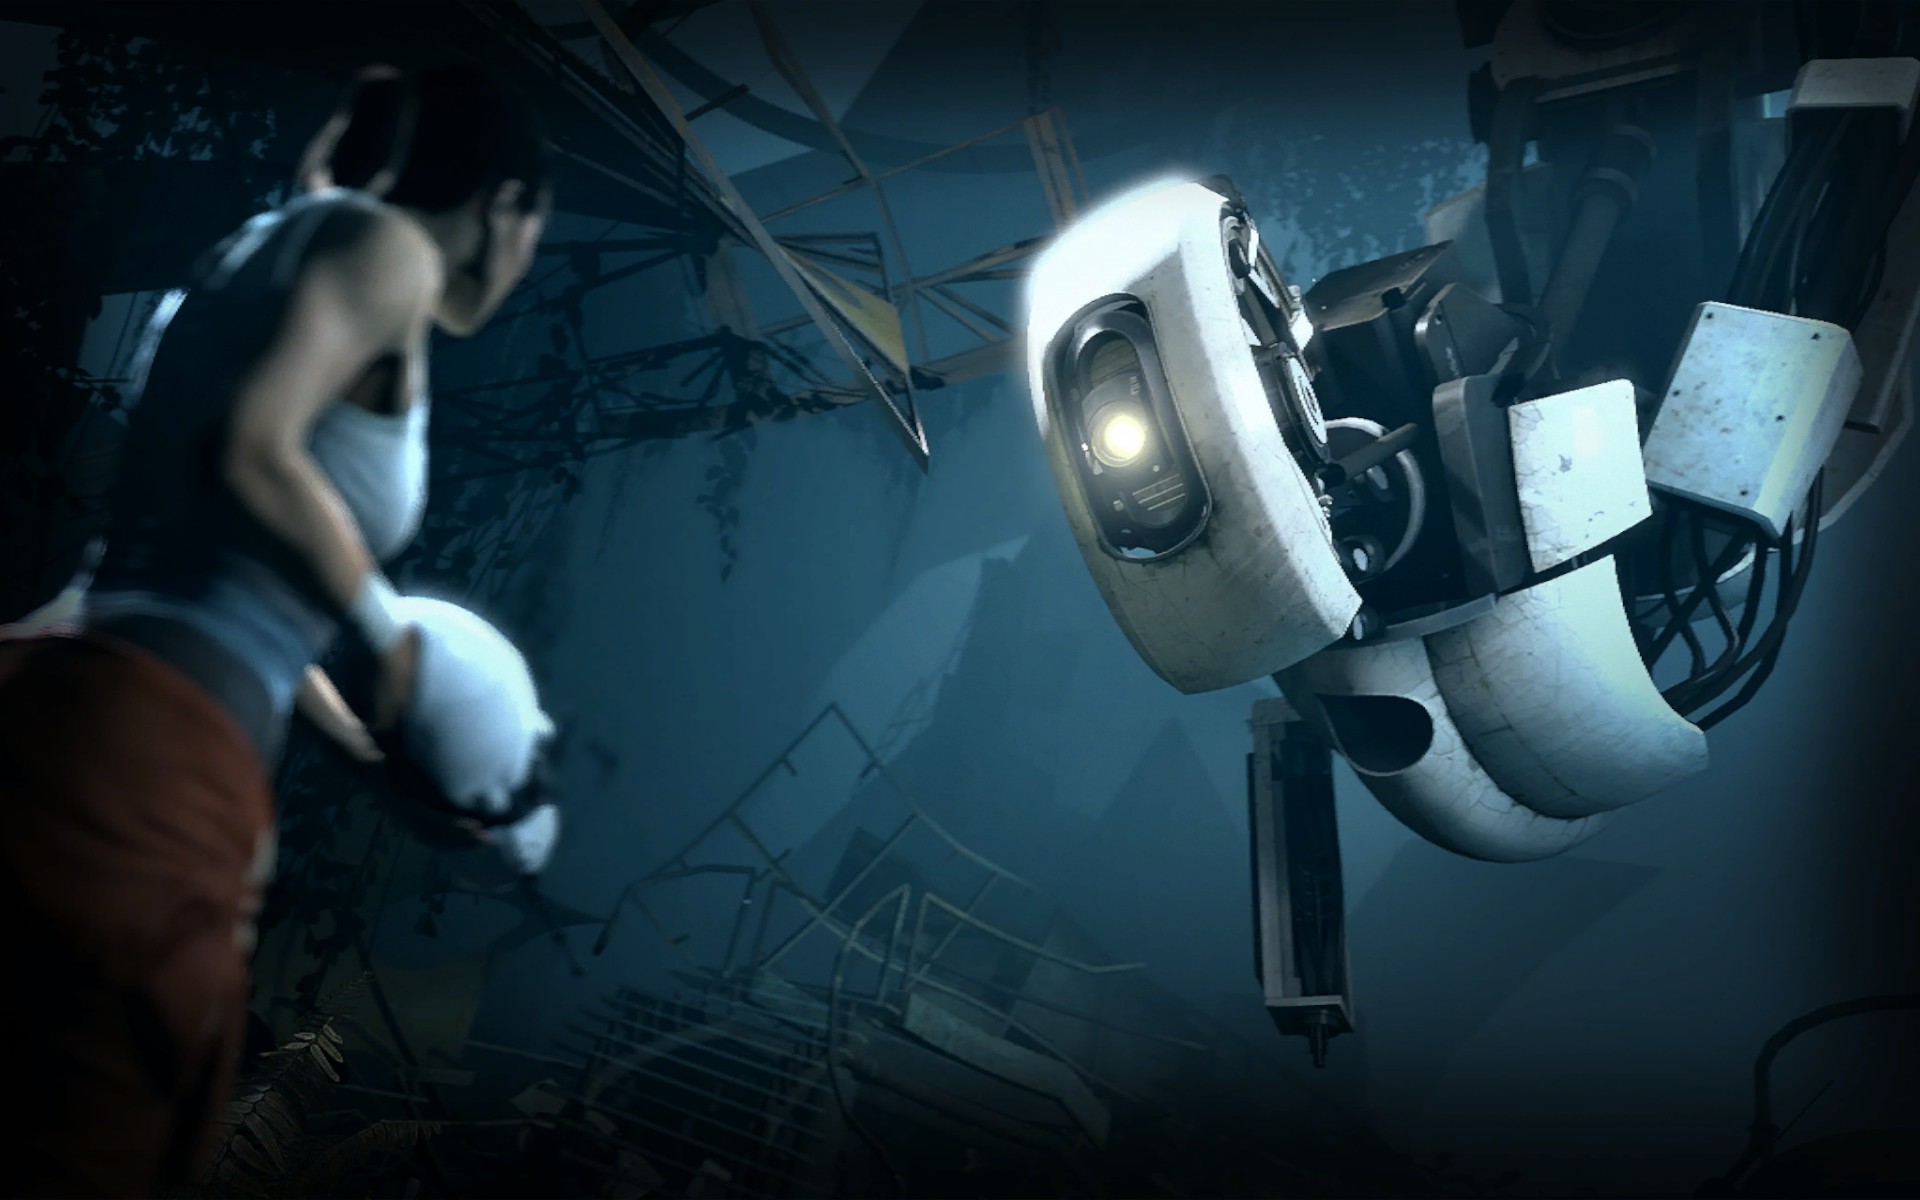 Glados and Chell